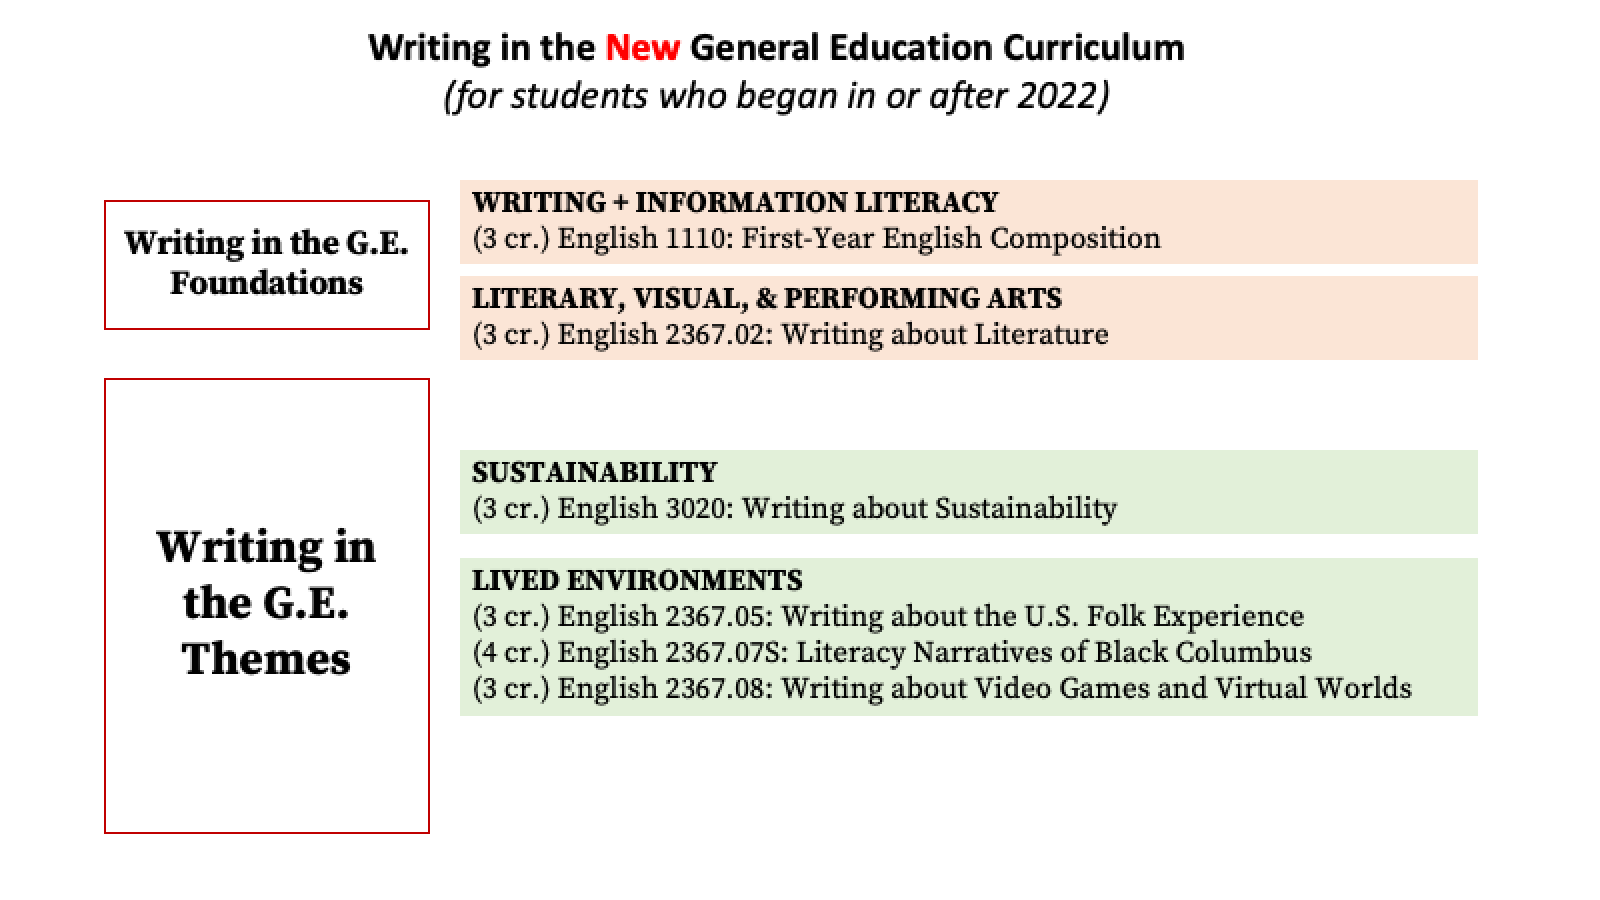 Description of Writing Courses in the new GE curriculum